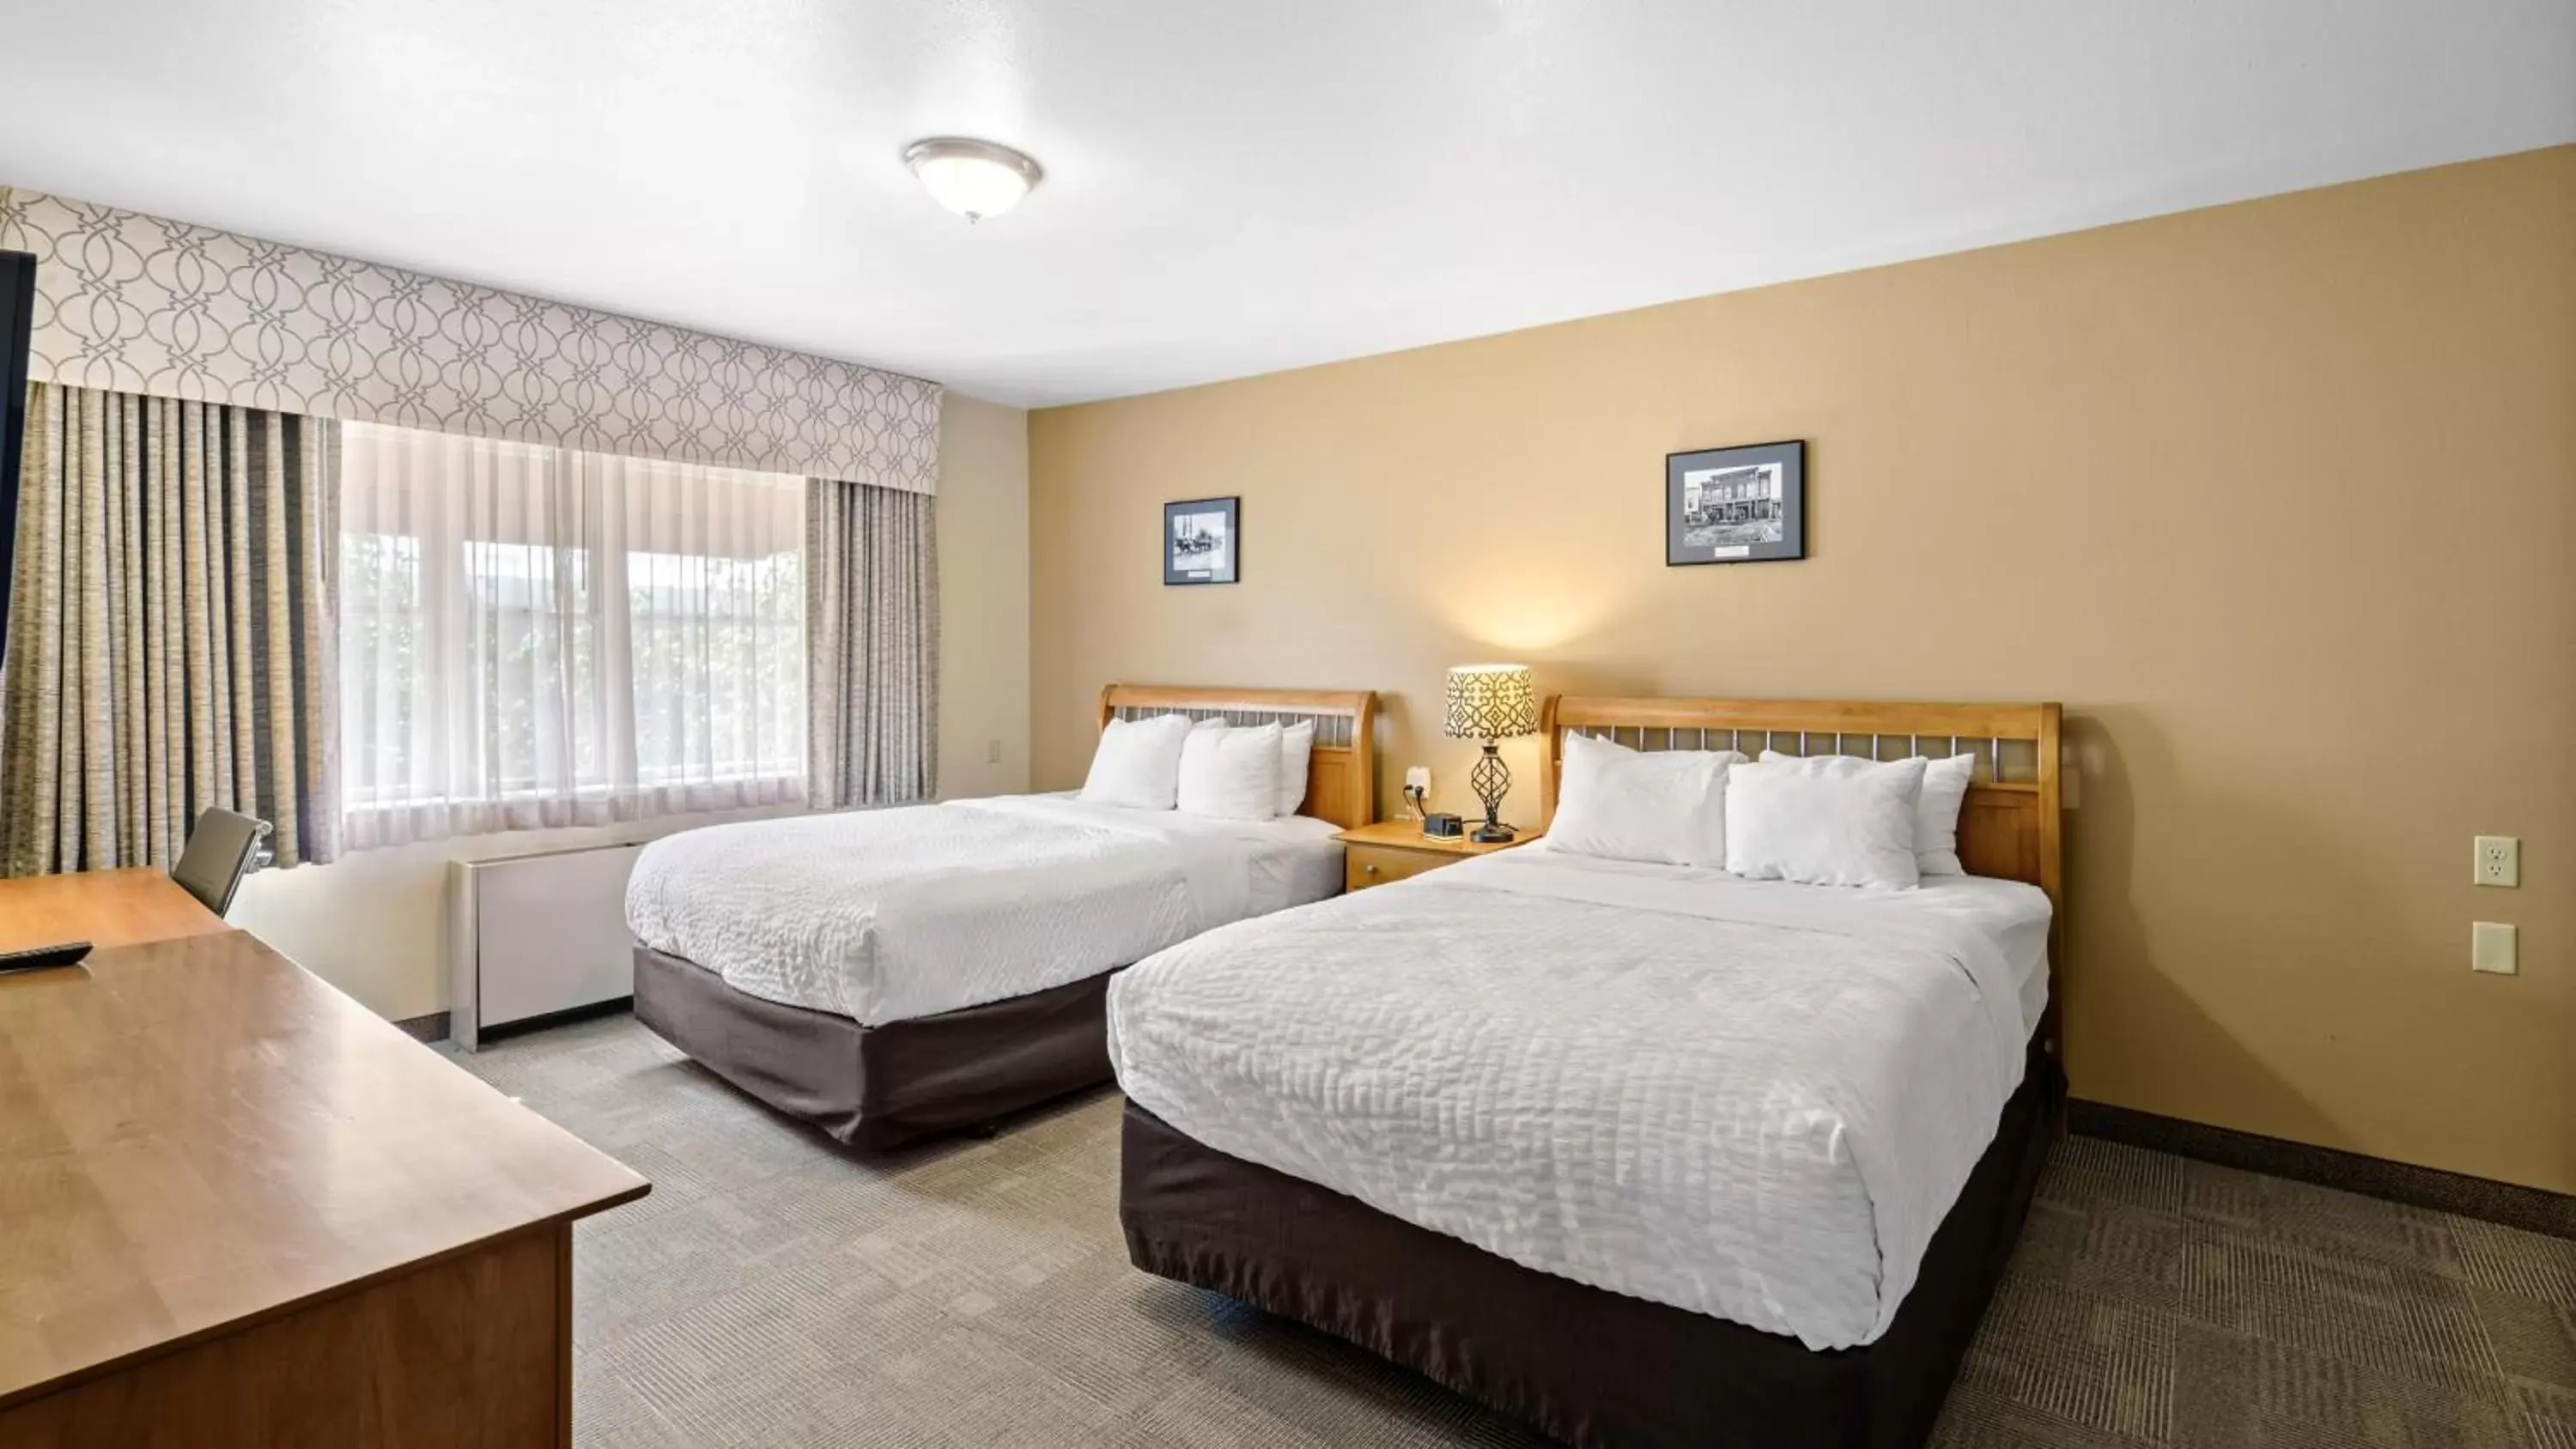 Facility for disabled guests, Bed in Clarion Hotel & Suites Fairbanks near Ft. Wainwright